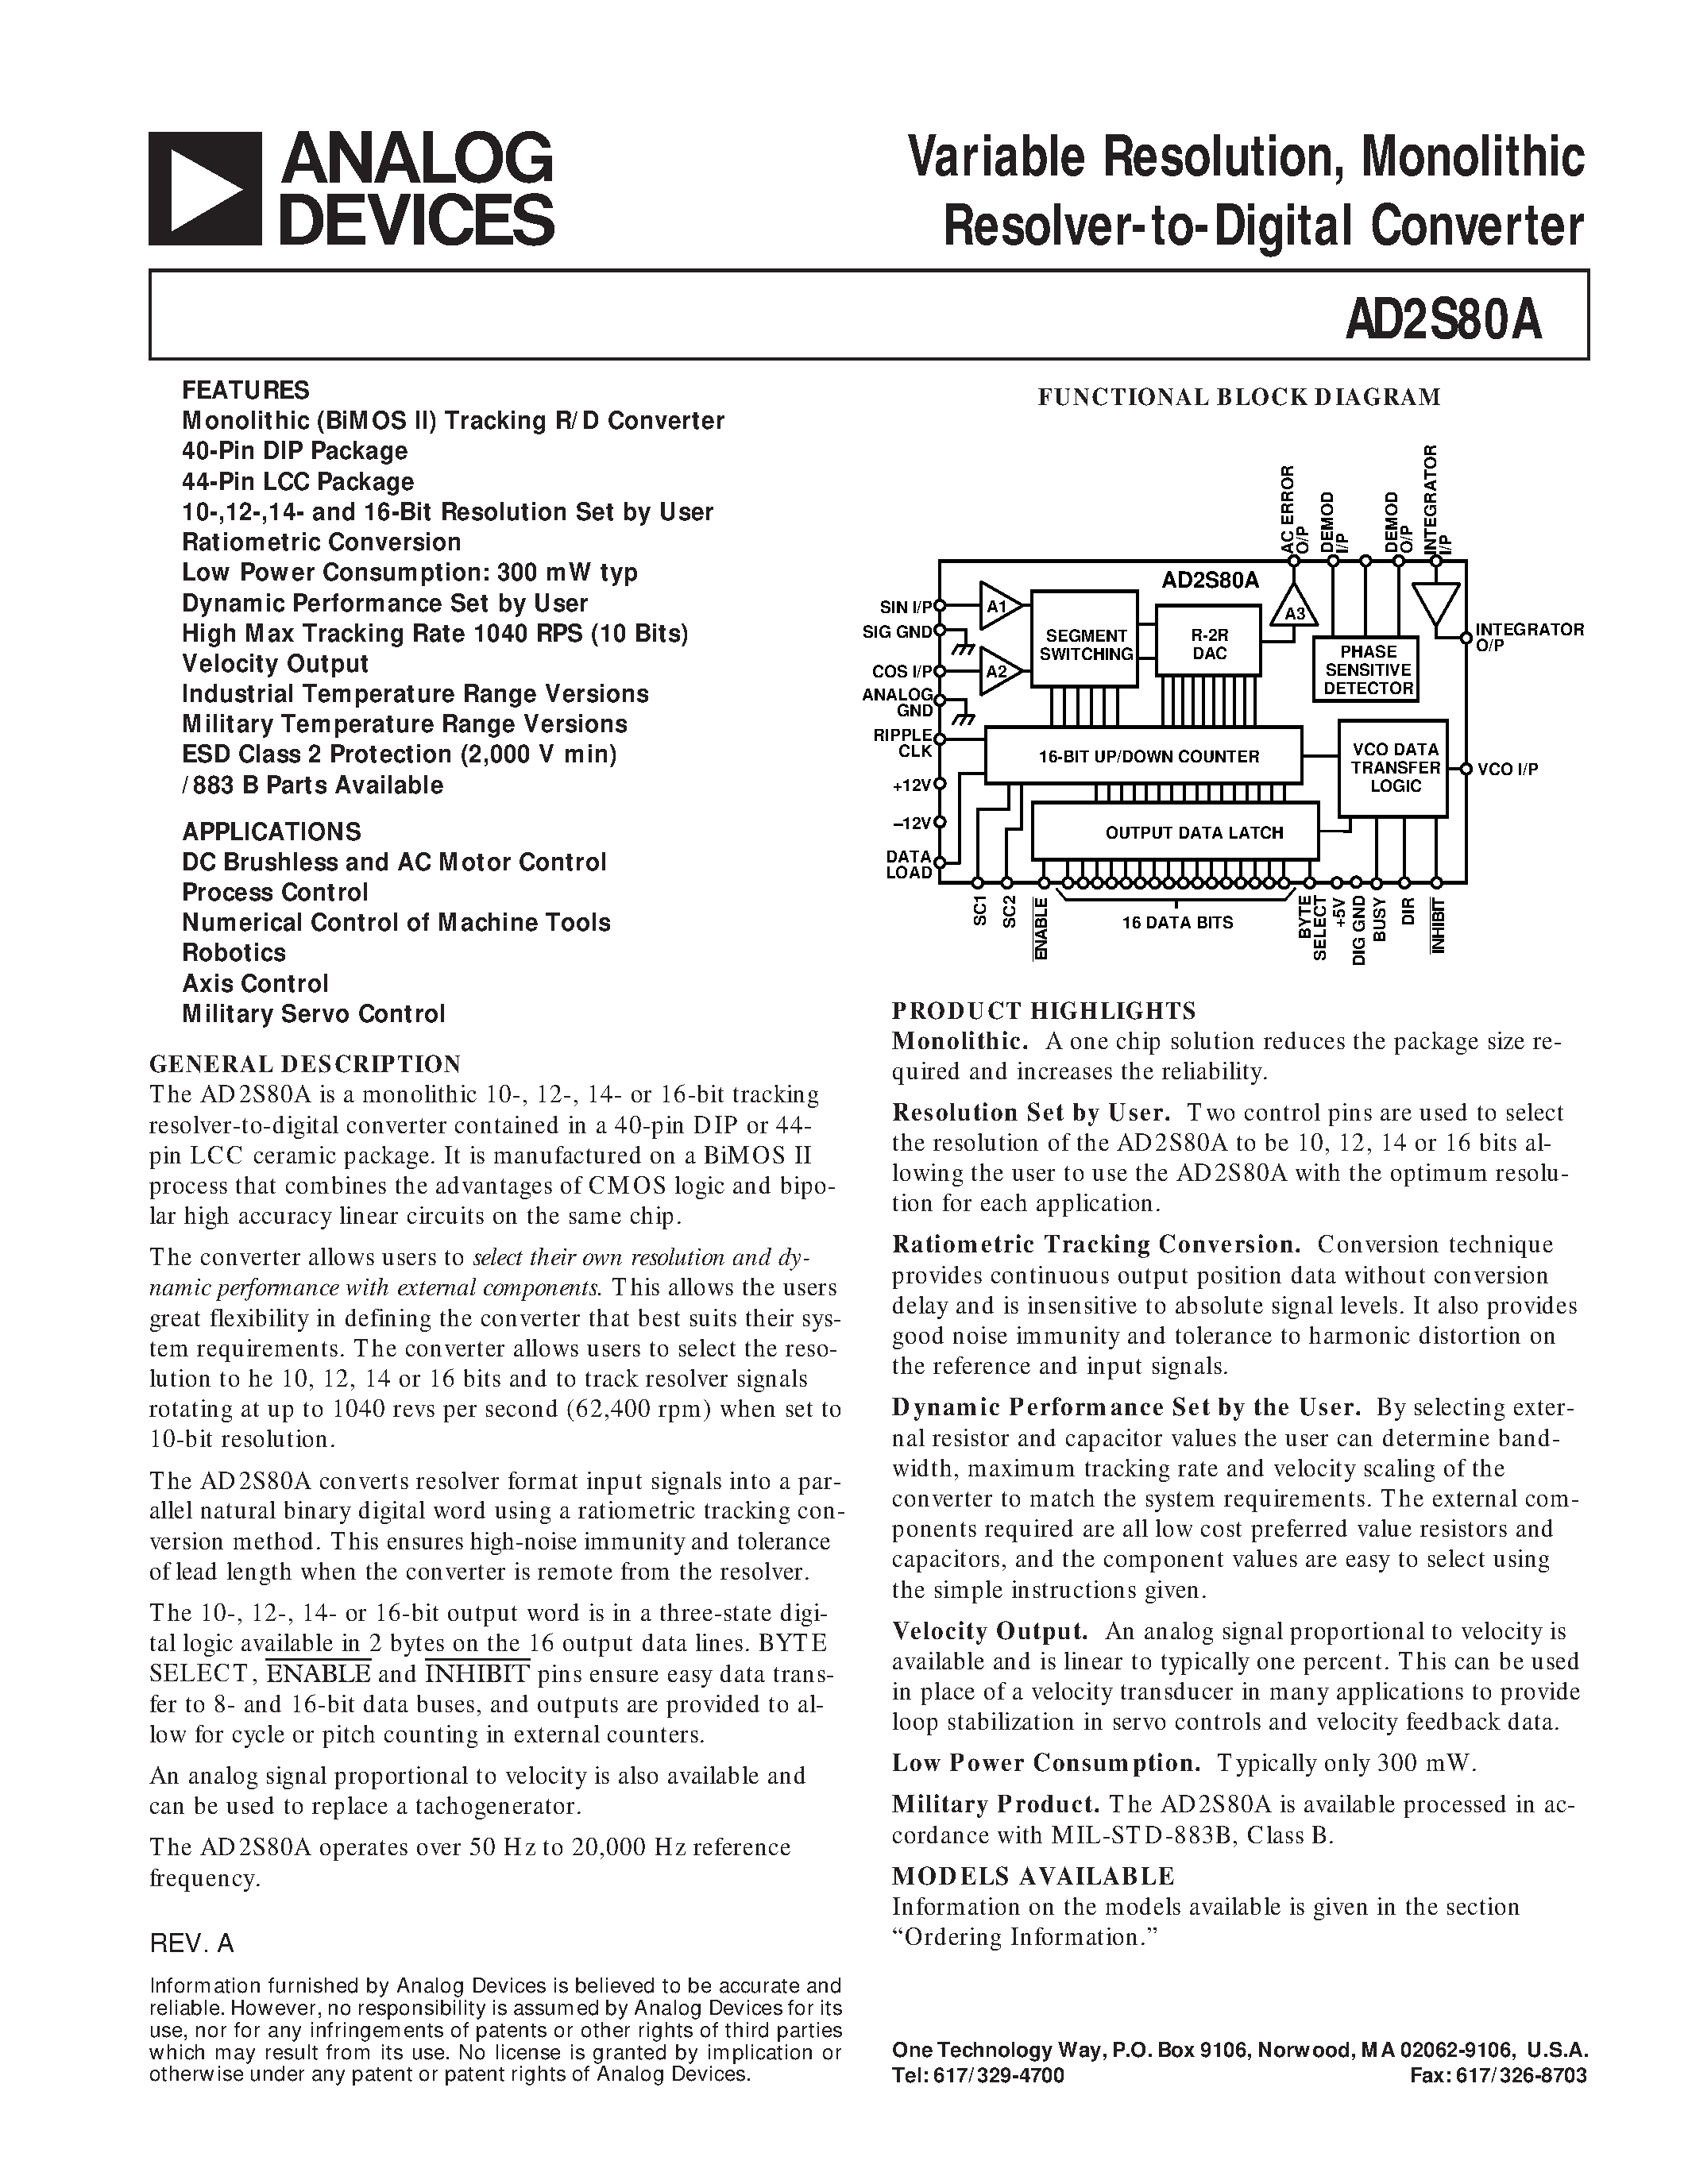 Datasheet AD2S80ATE - Variable Resolution/ Monolithic Resolver-to-Digital Converter page 1